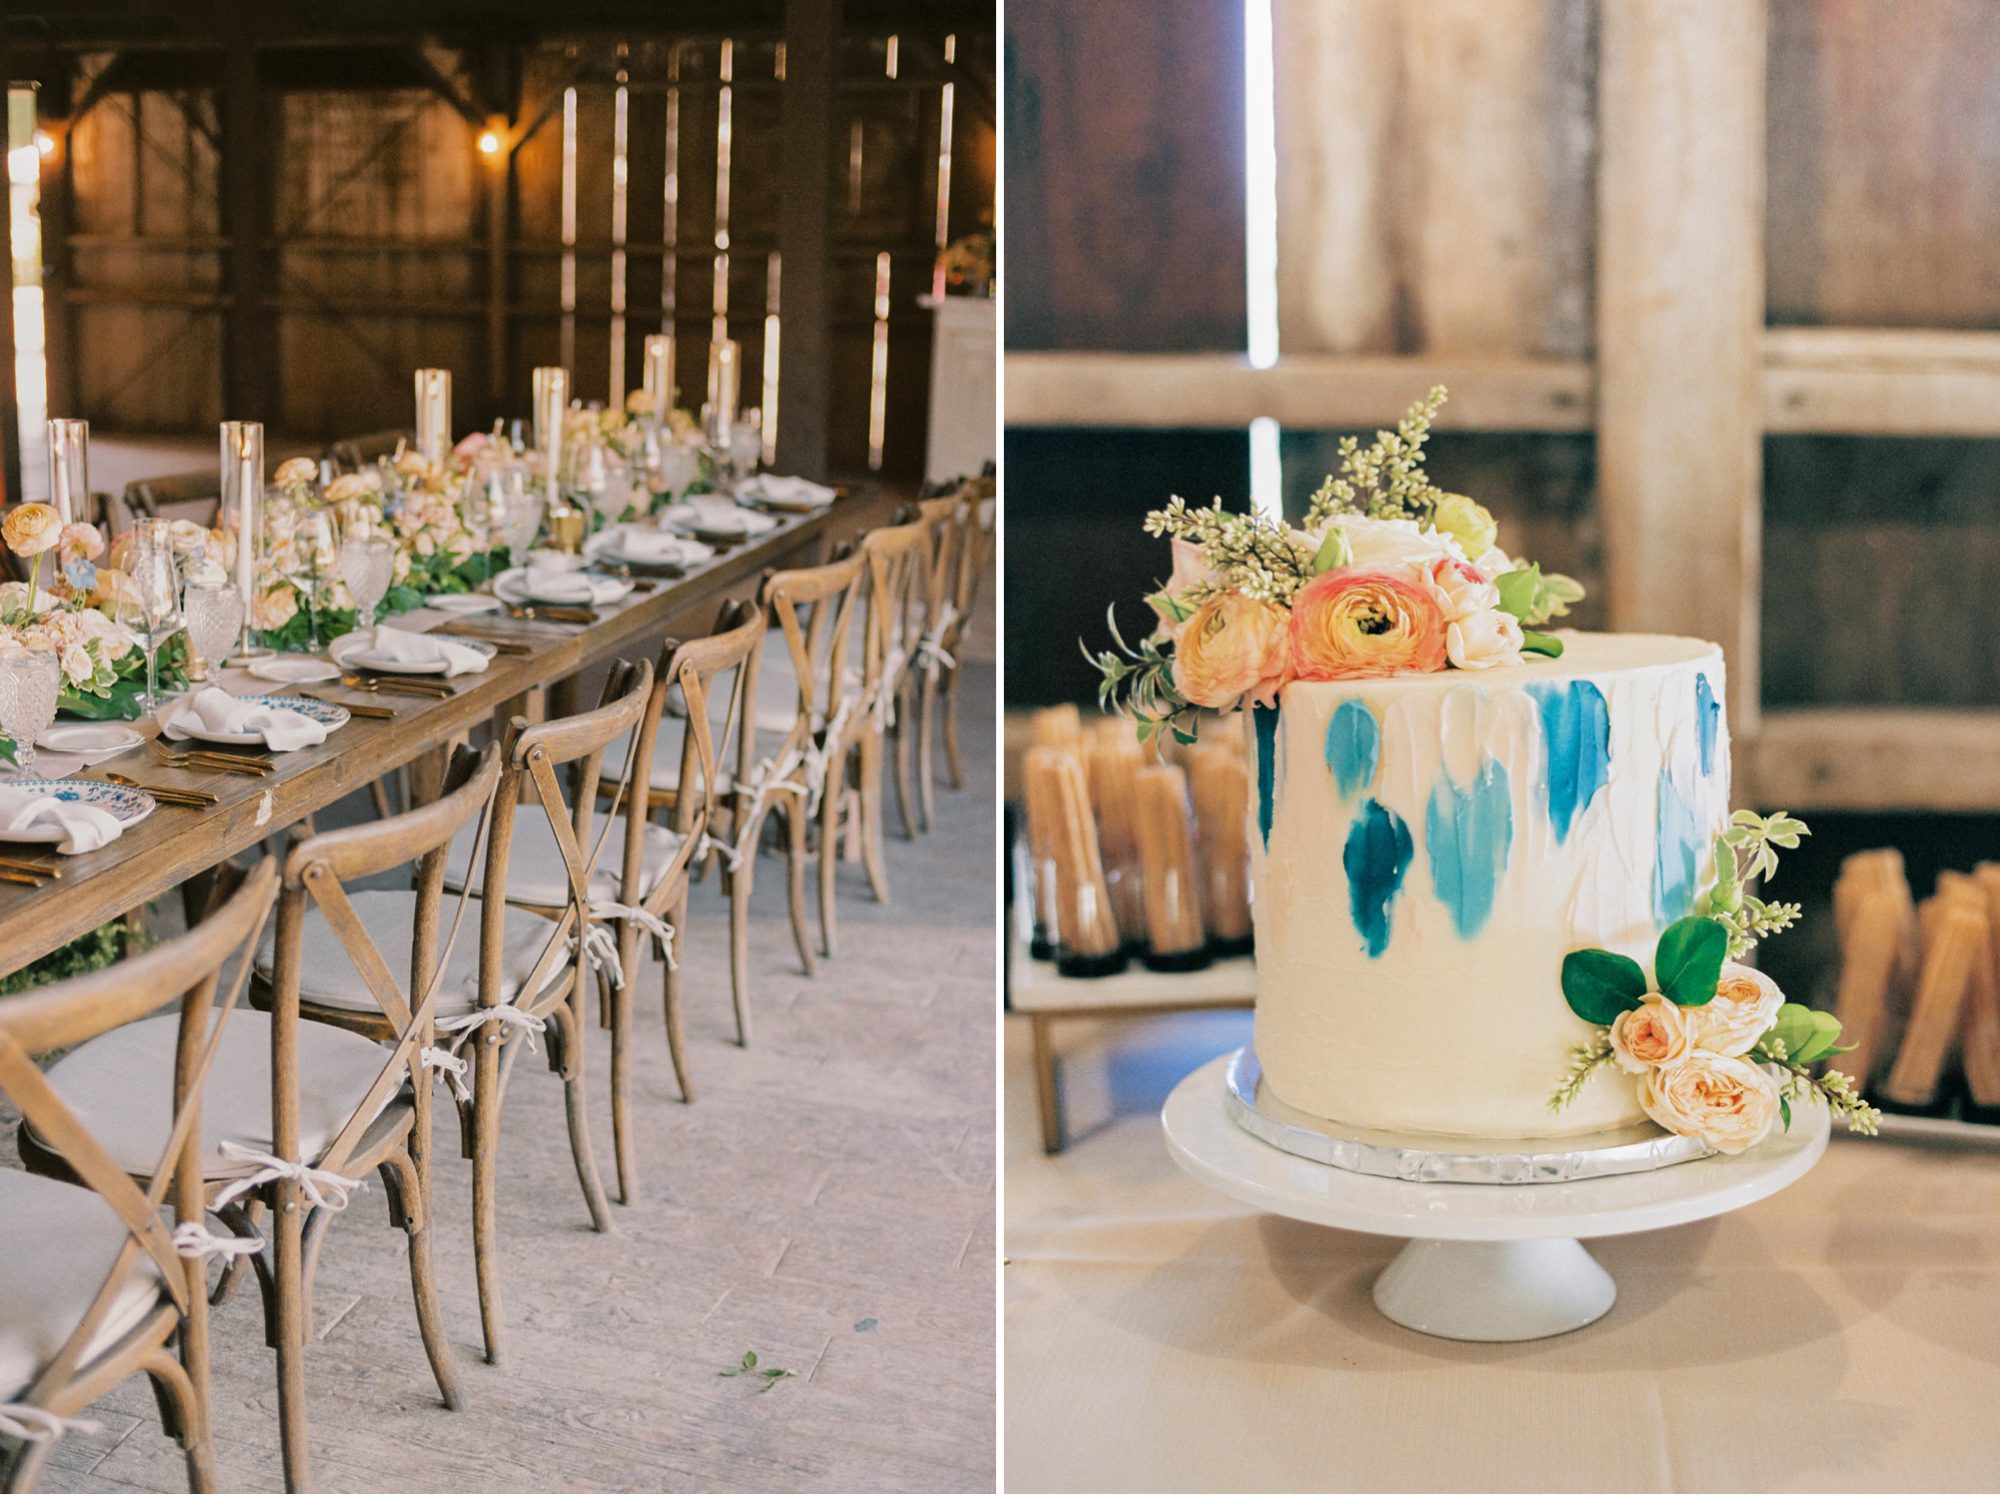 Reception tablescape and bride & groom cake by Bri's sweet retreat the White Barn Edna Valley photographed by san luis obispo wedding photographers jessica sofranko